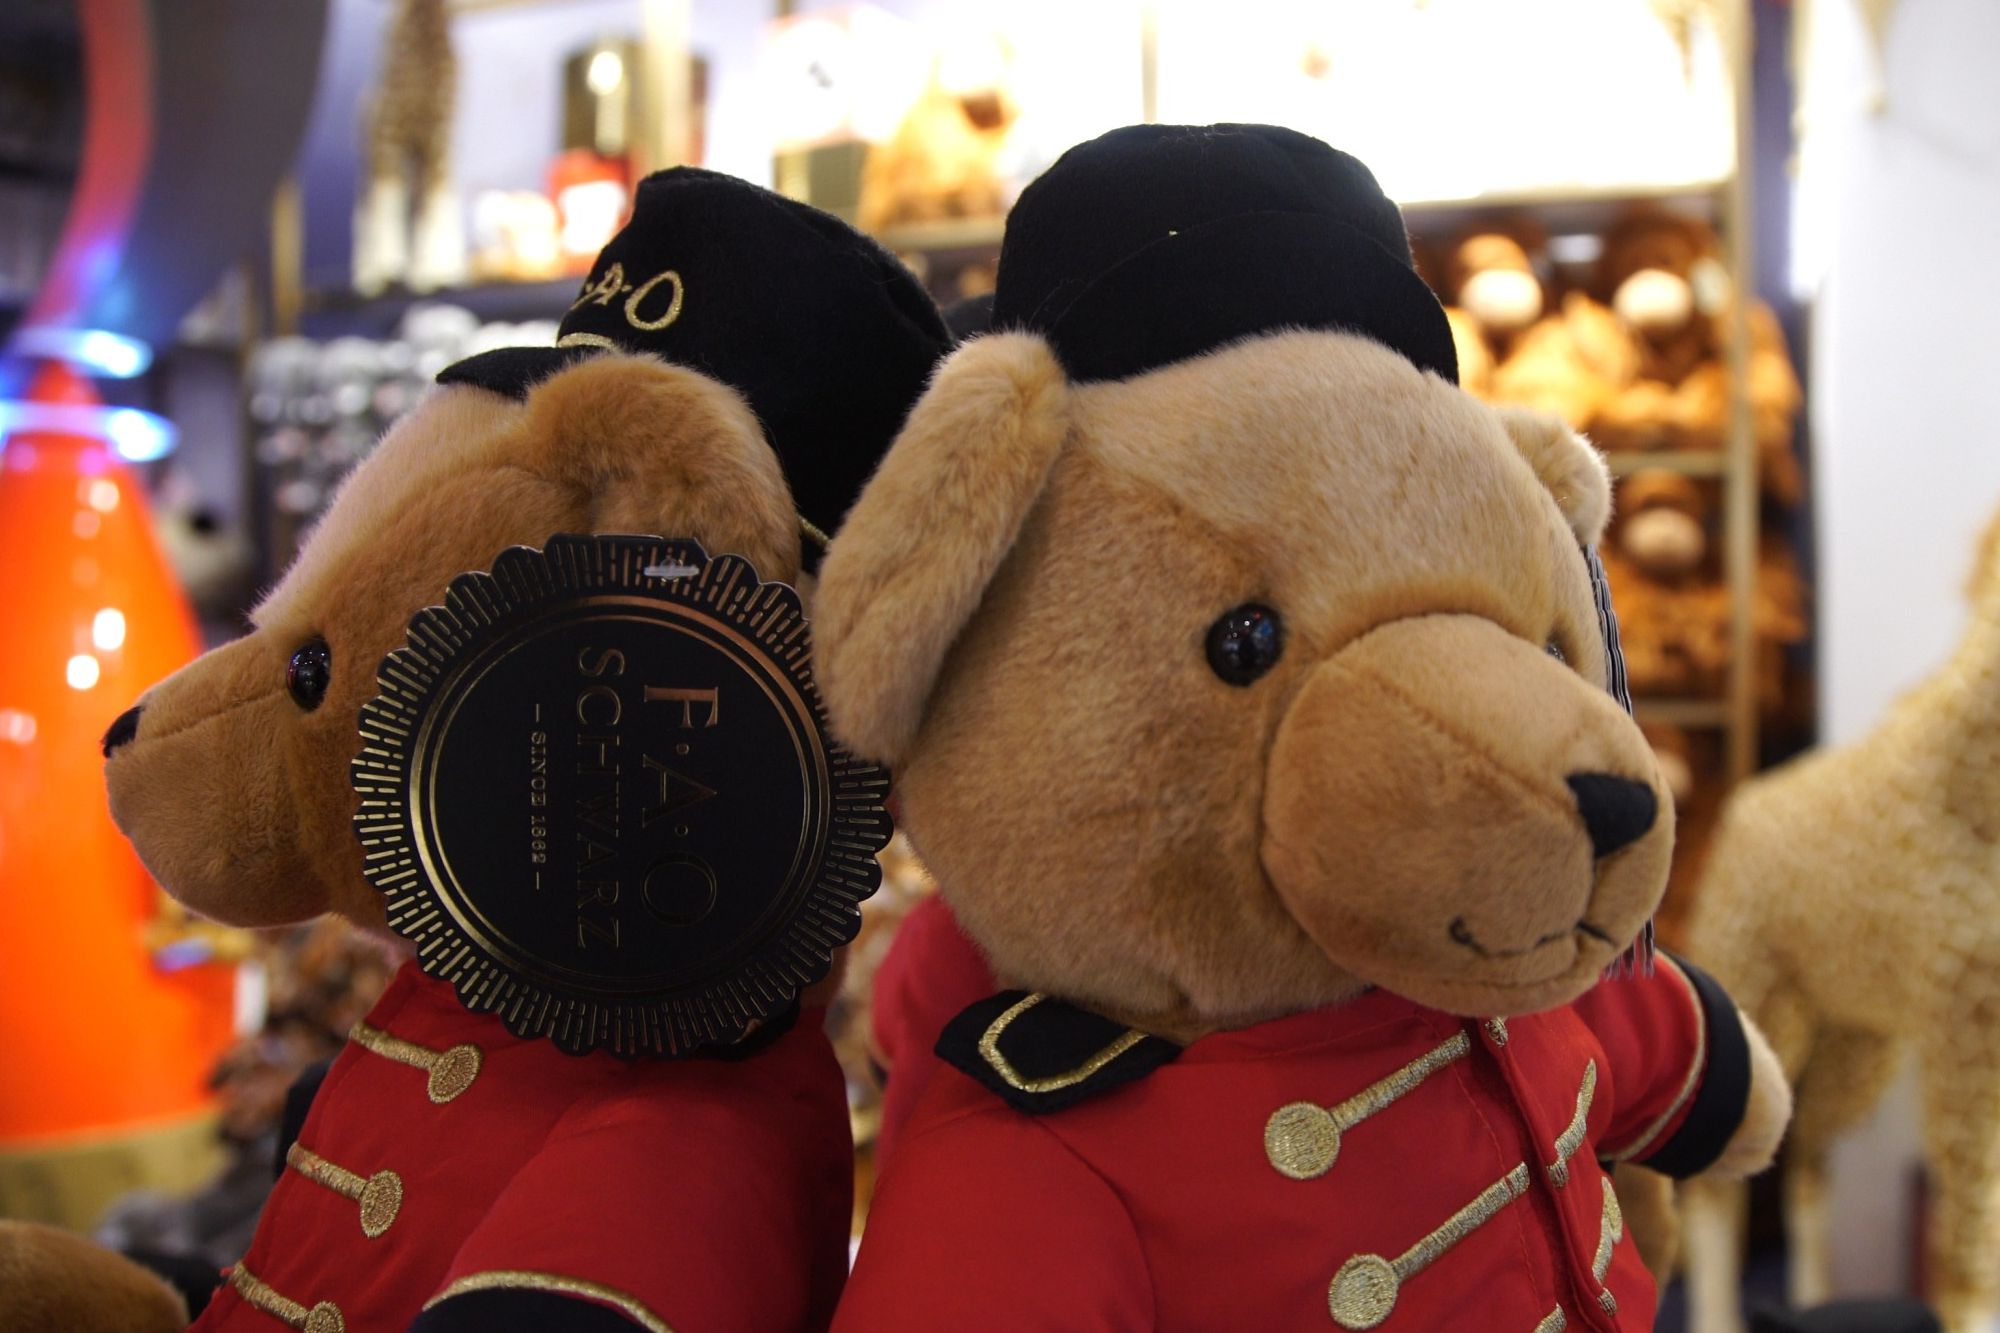 Farewell FAO Schwarz: Last day of business at NYC toy store